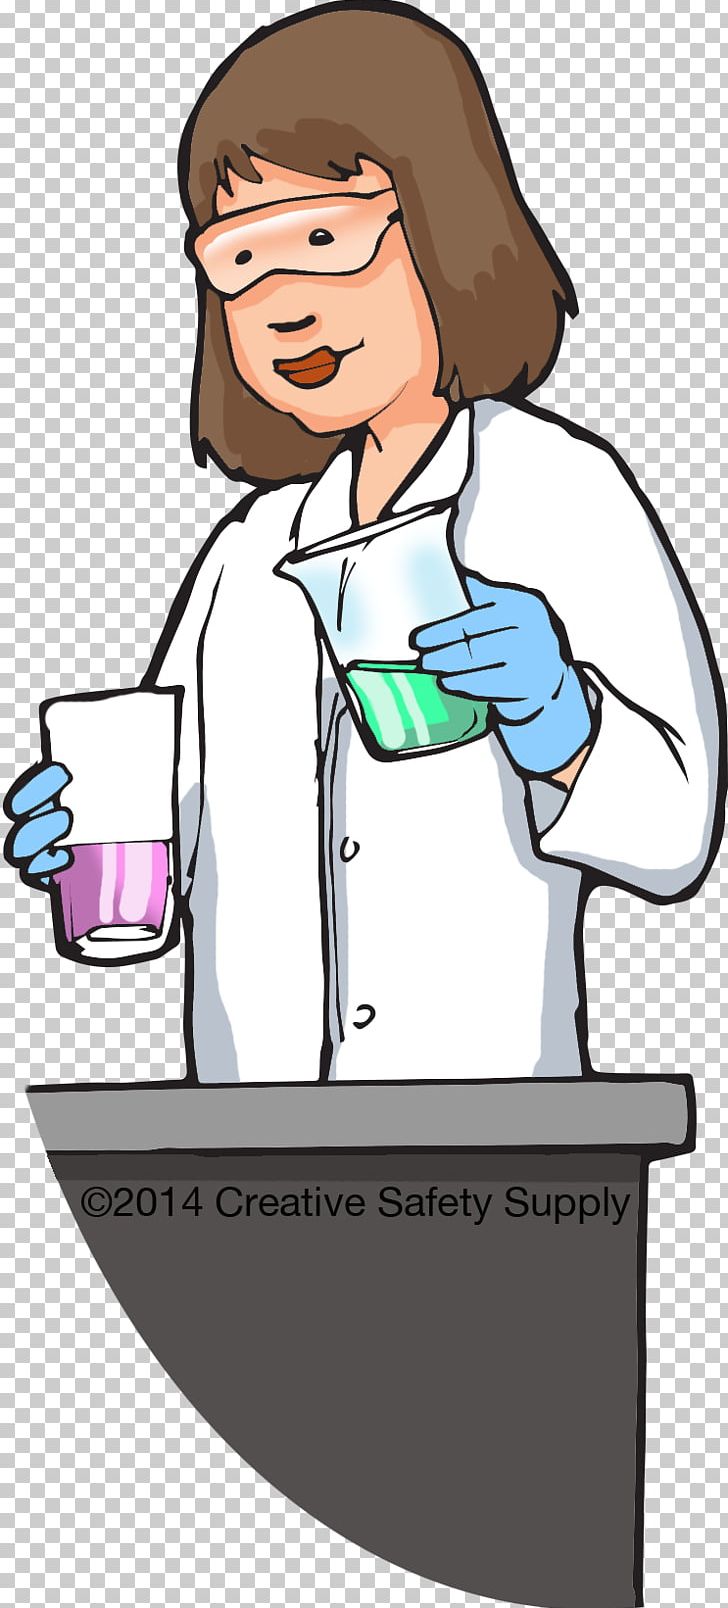 Laboratory Safety Chemistry Chemical Substance PNG, Clipart, Cartoon, Chemical Substance, Chemist, Chemistry, Dia Free PNG Download